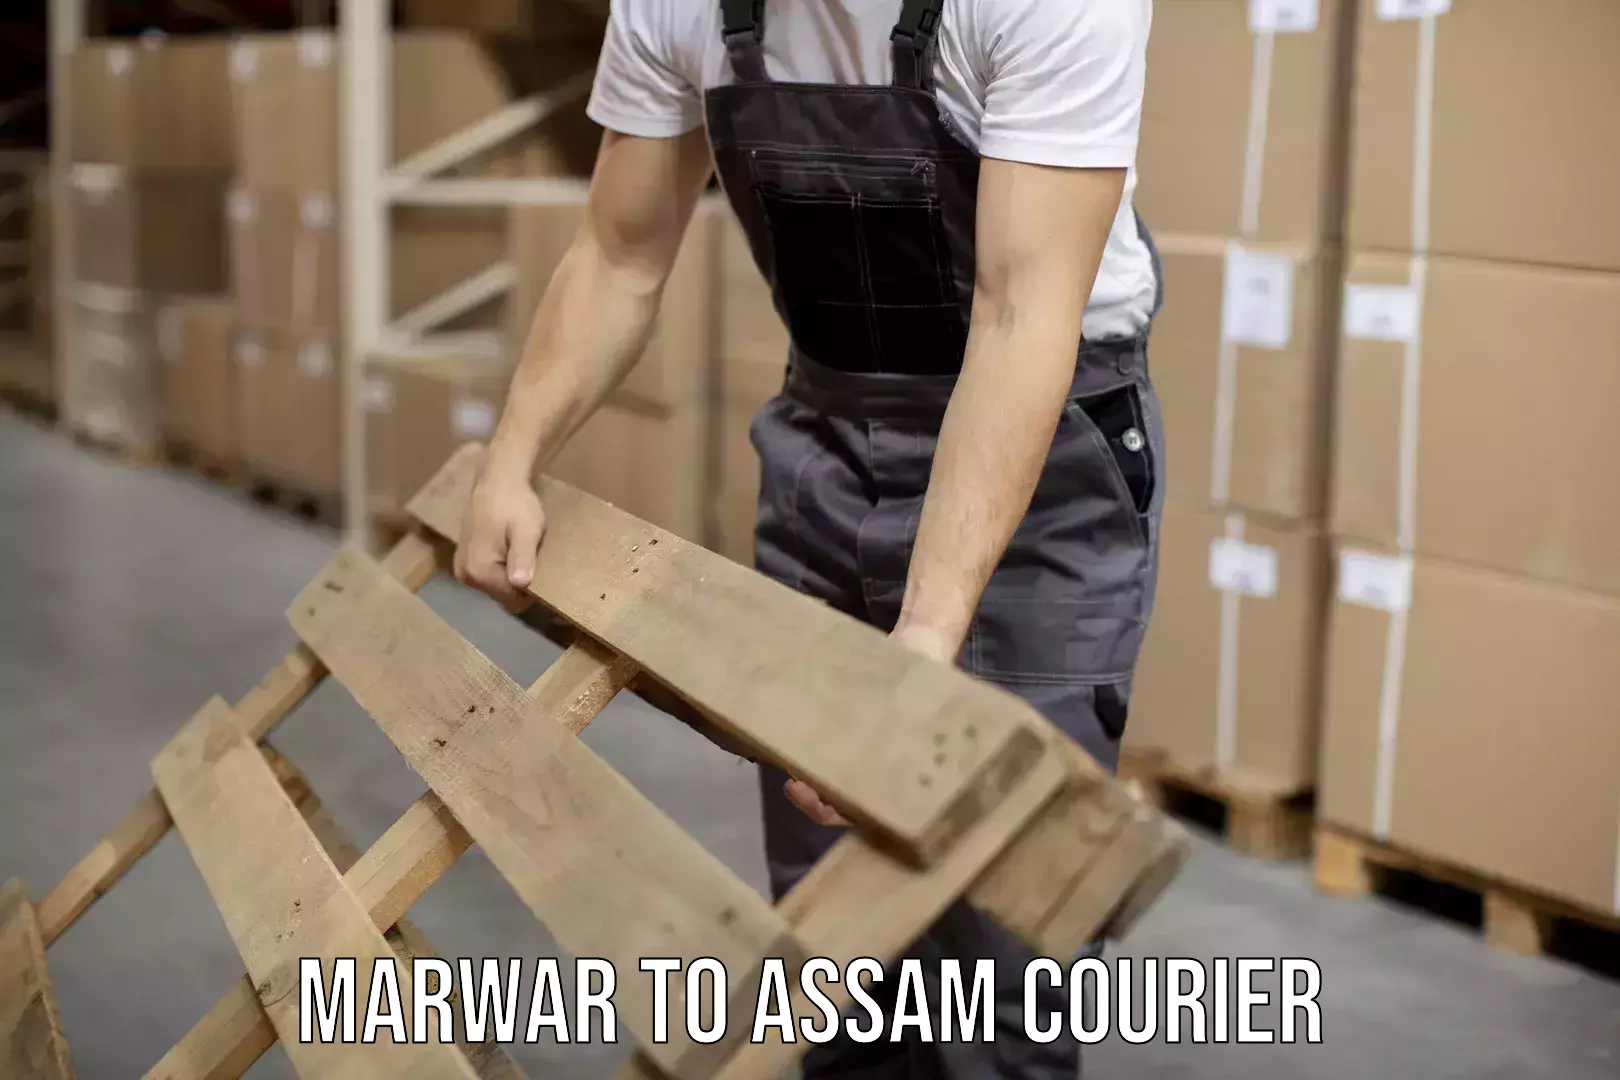 Courier service booking Marwar to Lala Assam